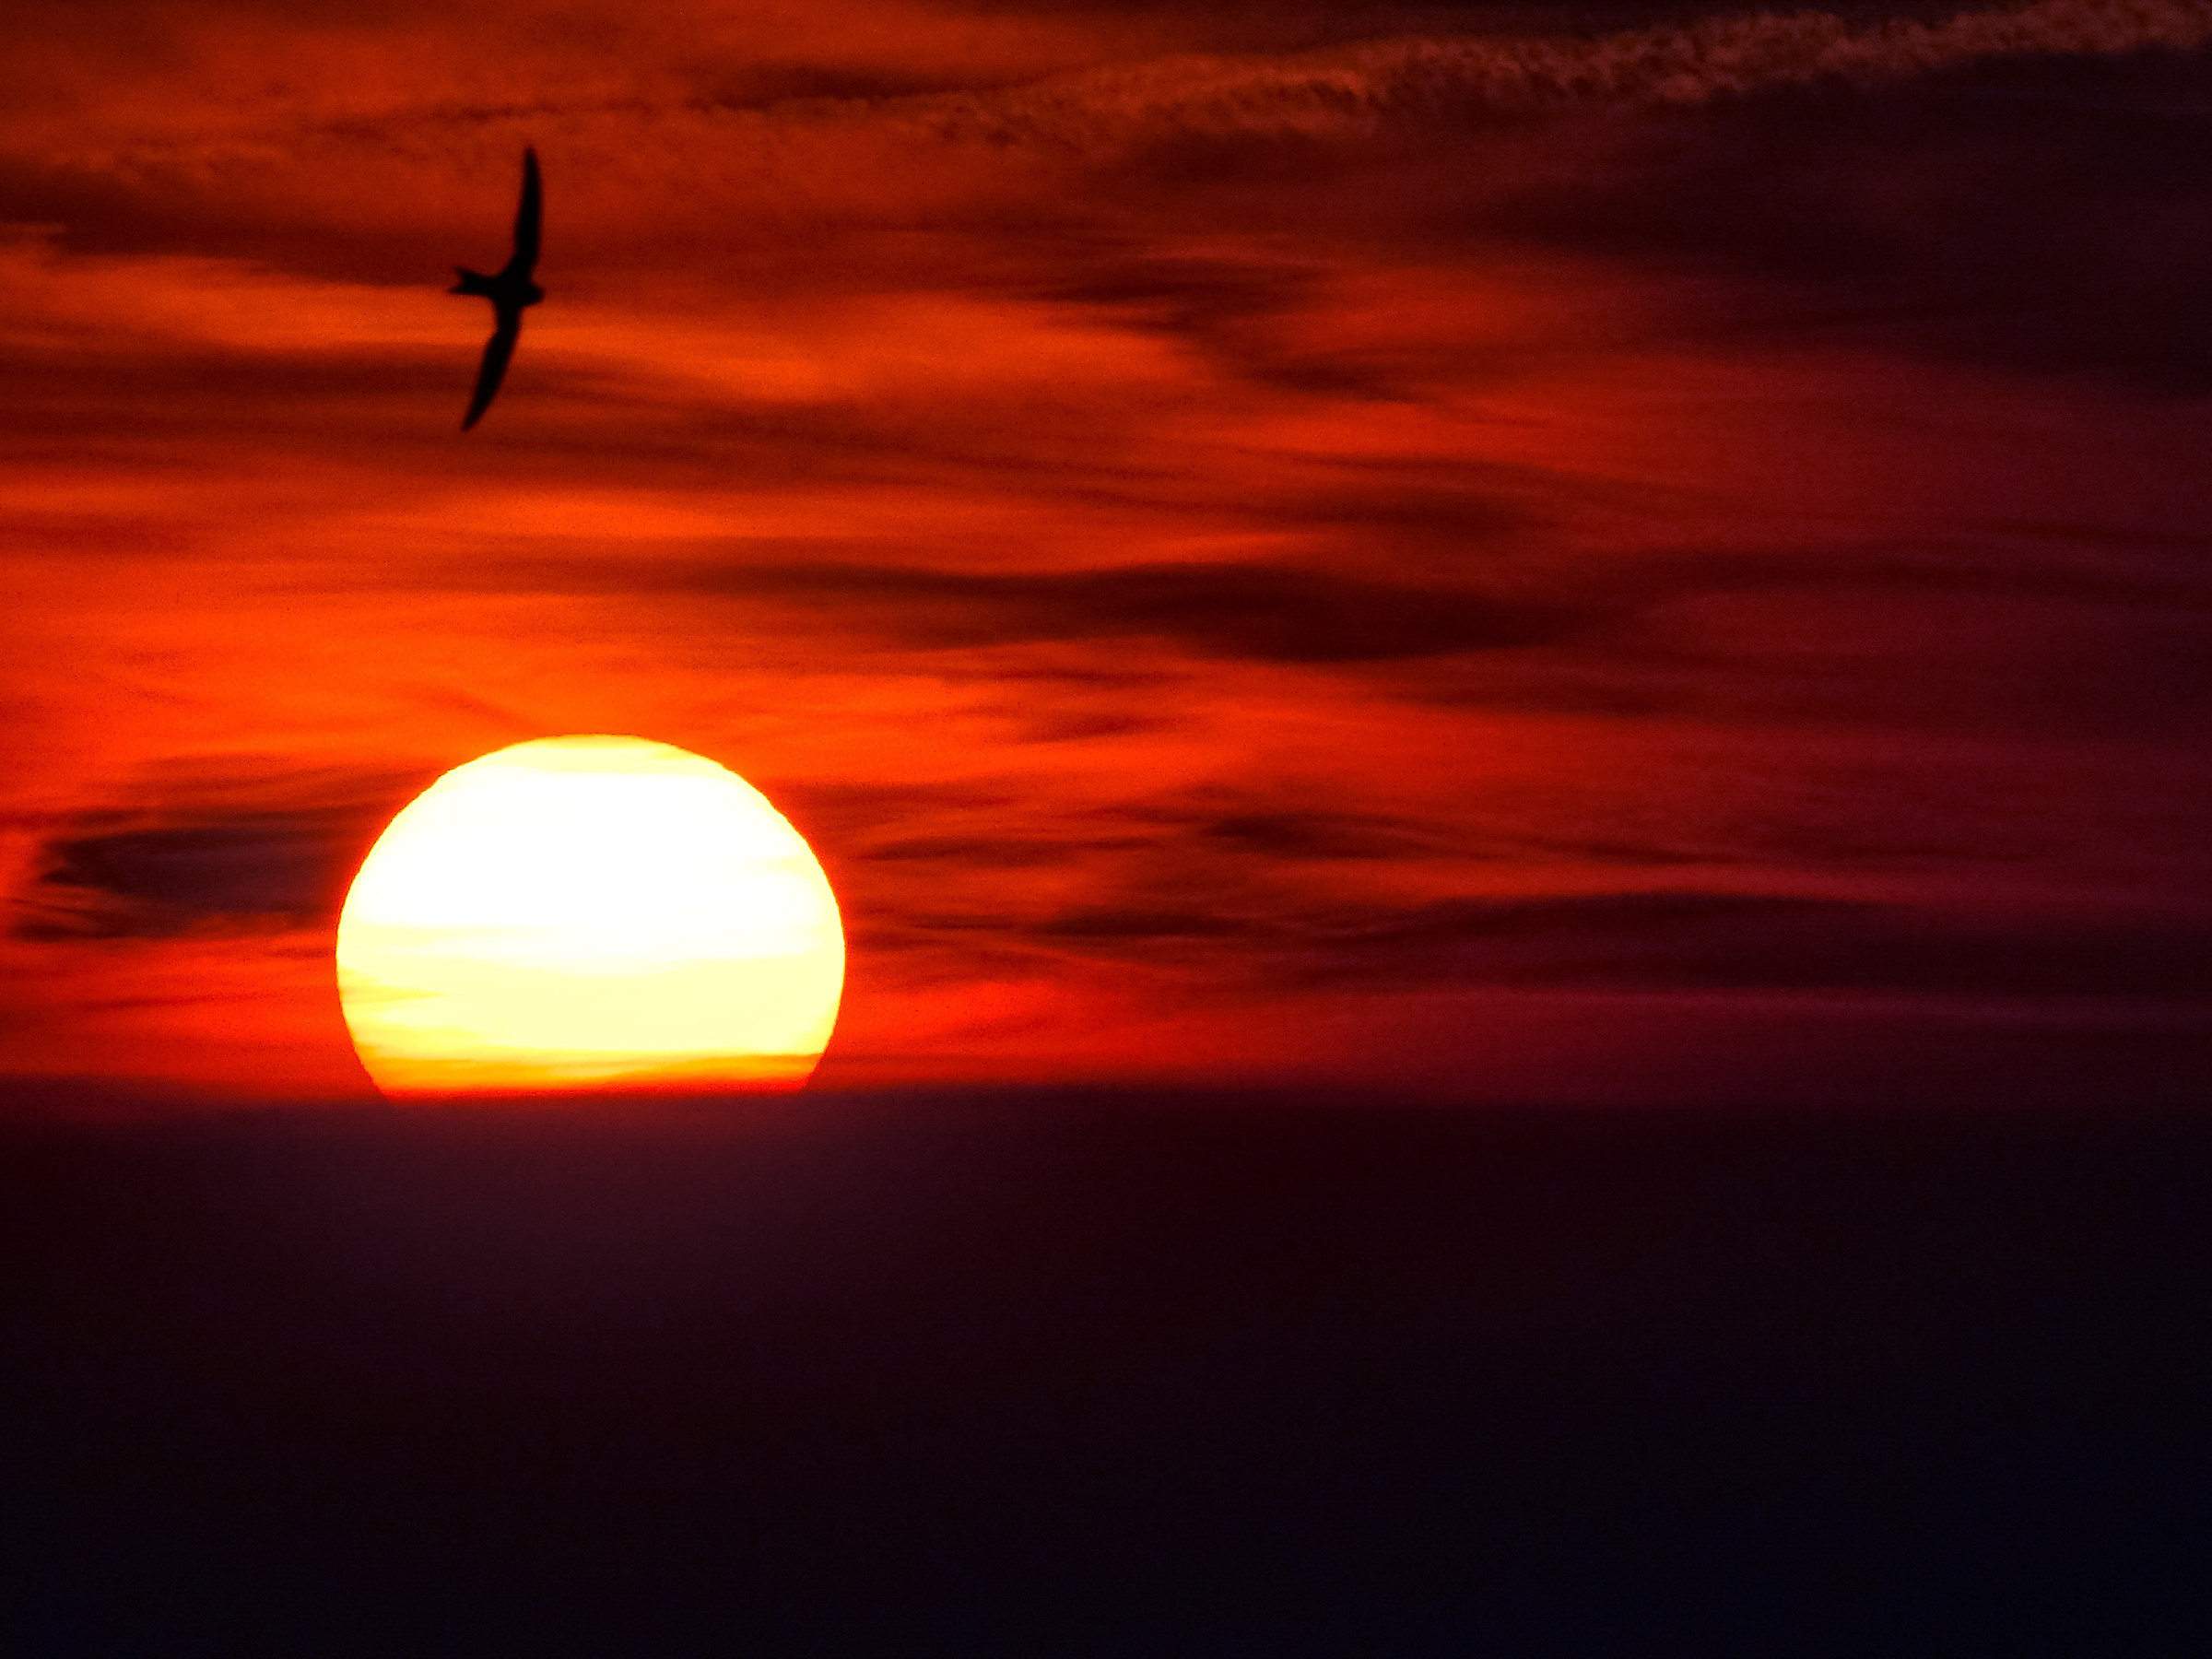 Swallow in the sunset...